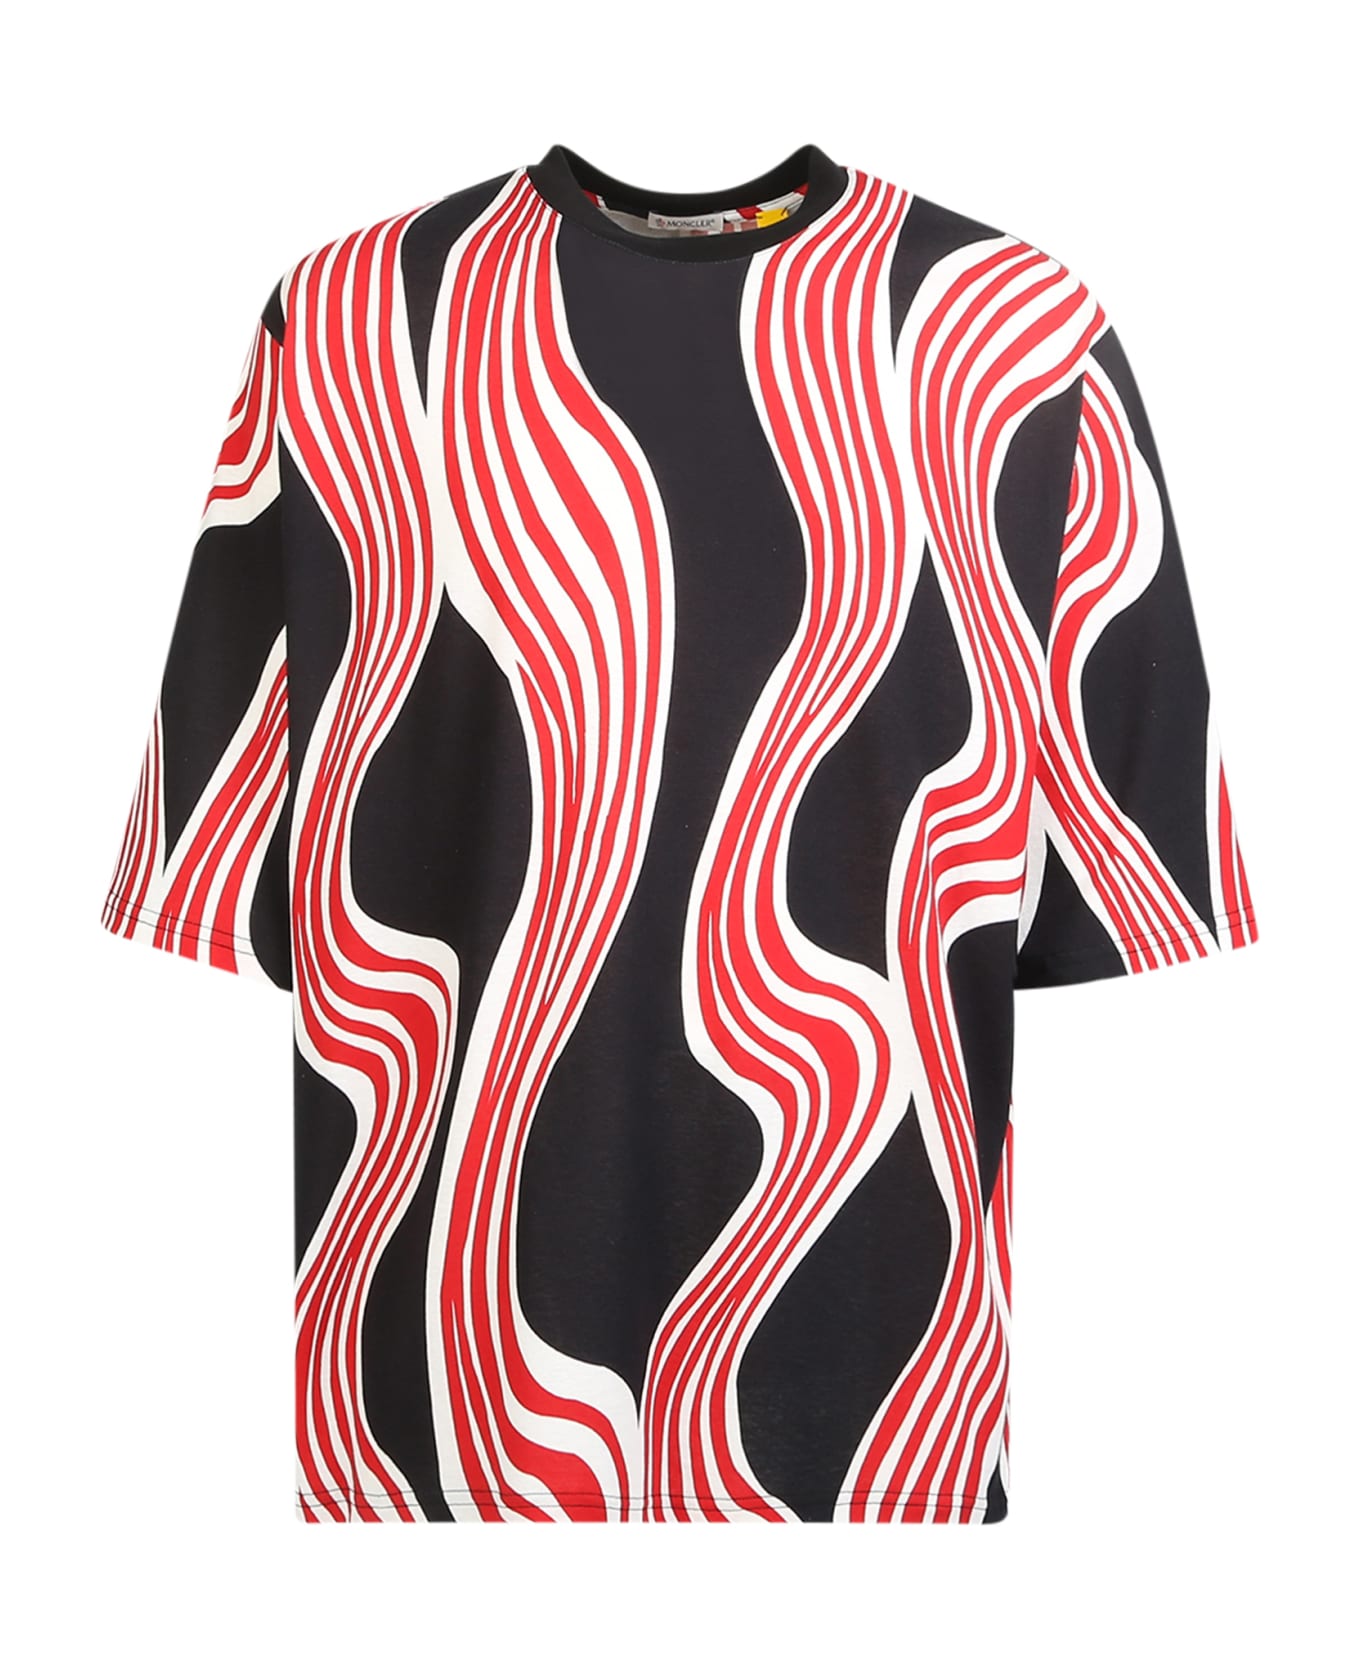 Moncler Genius Printed T-shirt - Moncler Jw Anderson - Red シャツ